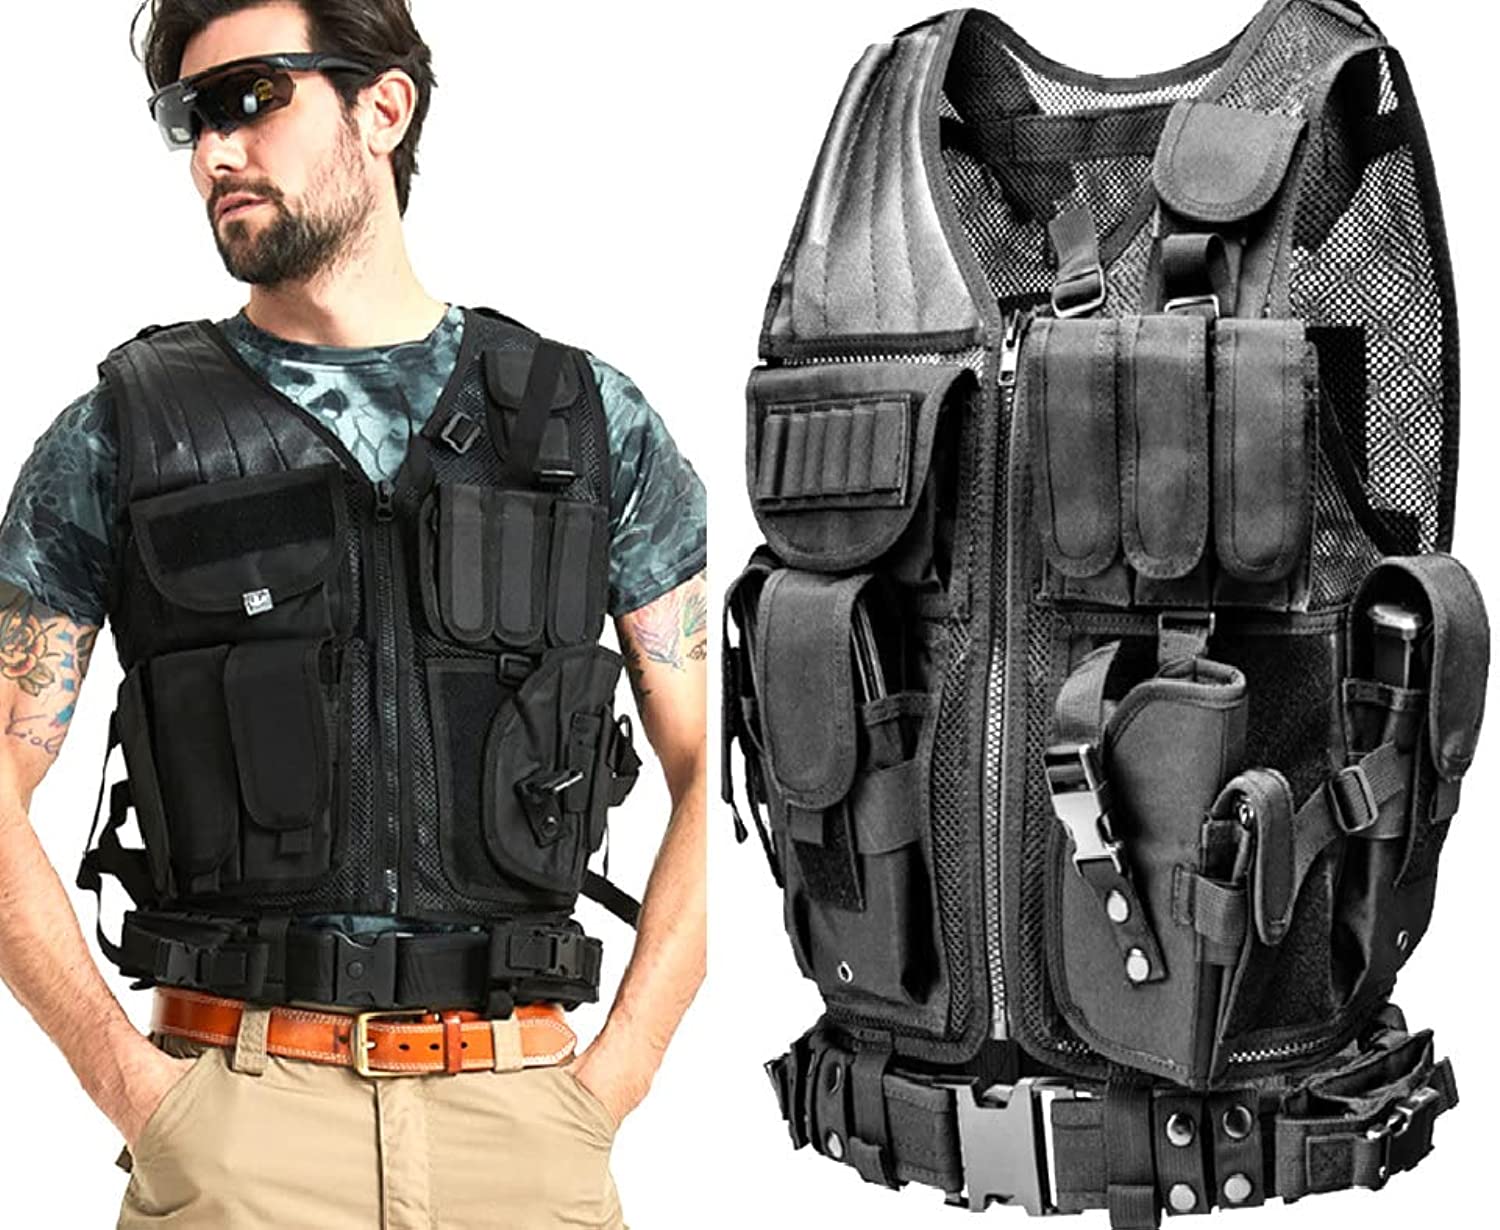 GALAXYLENSE Universal Military Combat Hunting Tactical Hiking Protection Vest Light Weight Heavy Duty Breathable 600 D Polyester